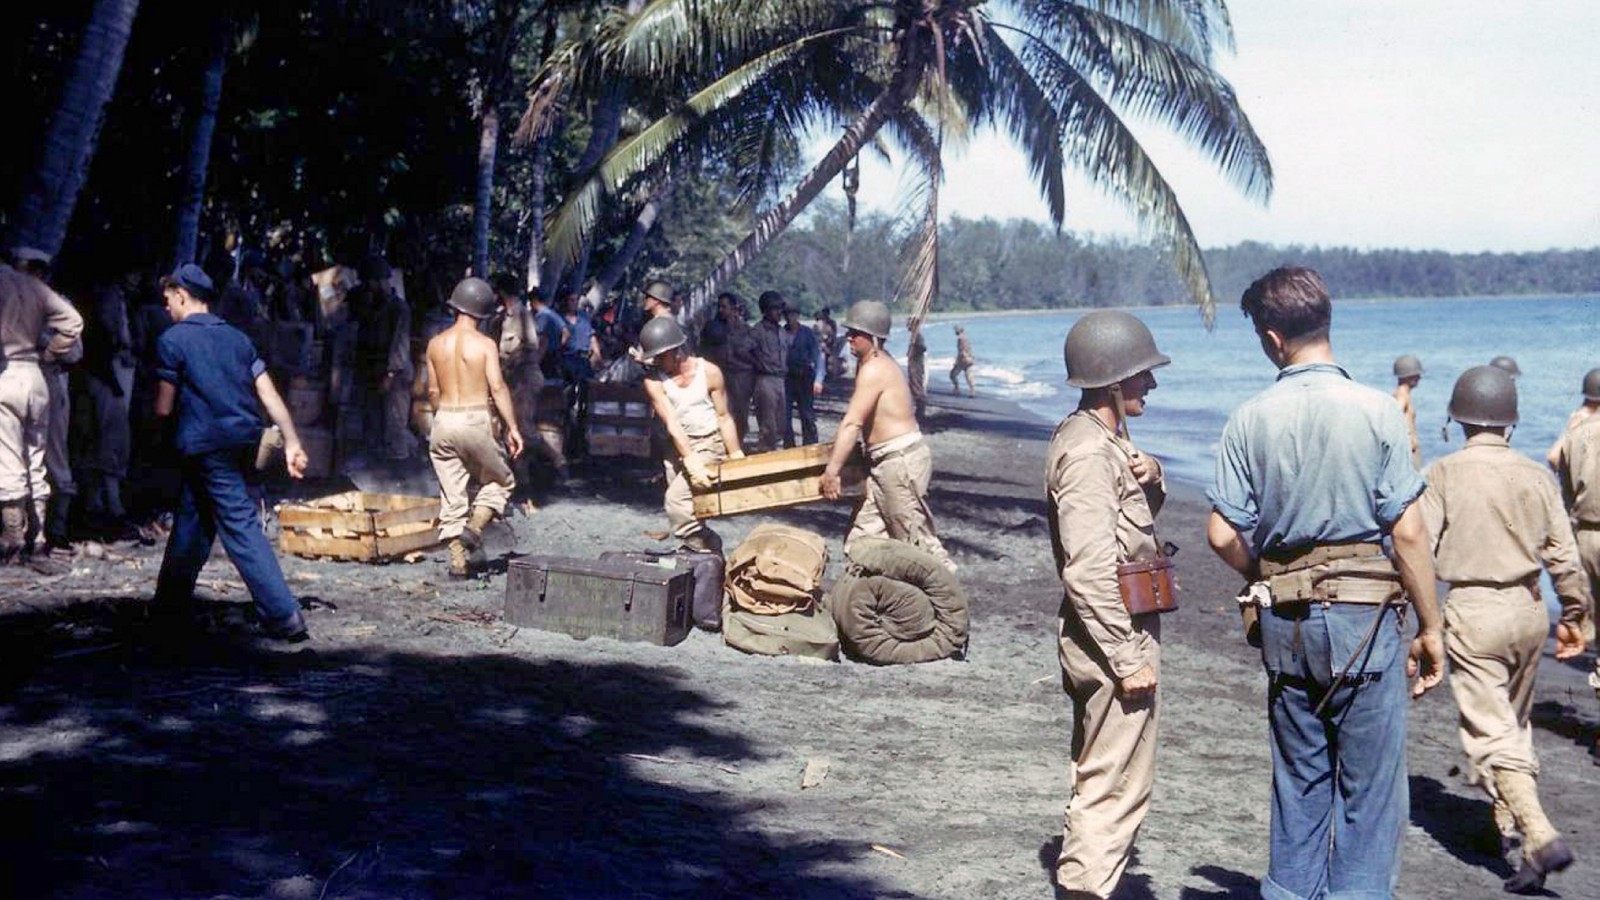 American troops unloading supplies on the shores of Guadalcanal Island. Dated 1943